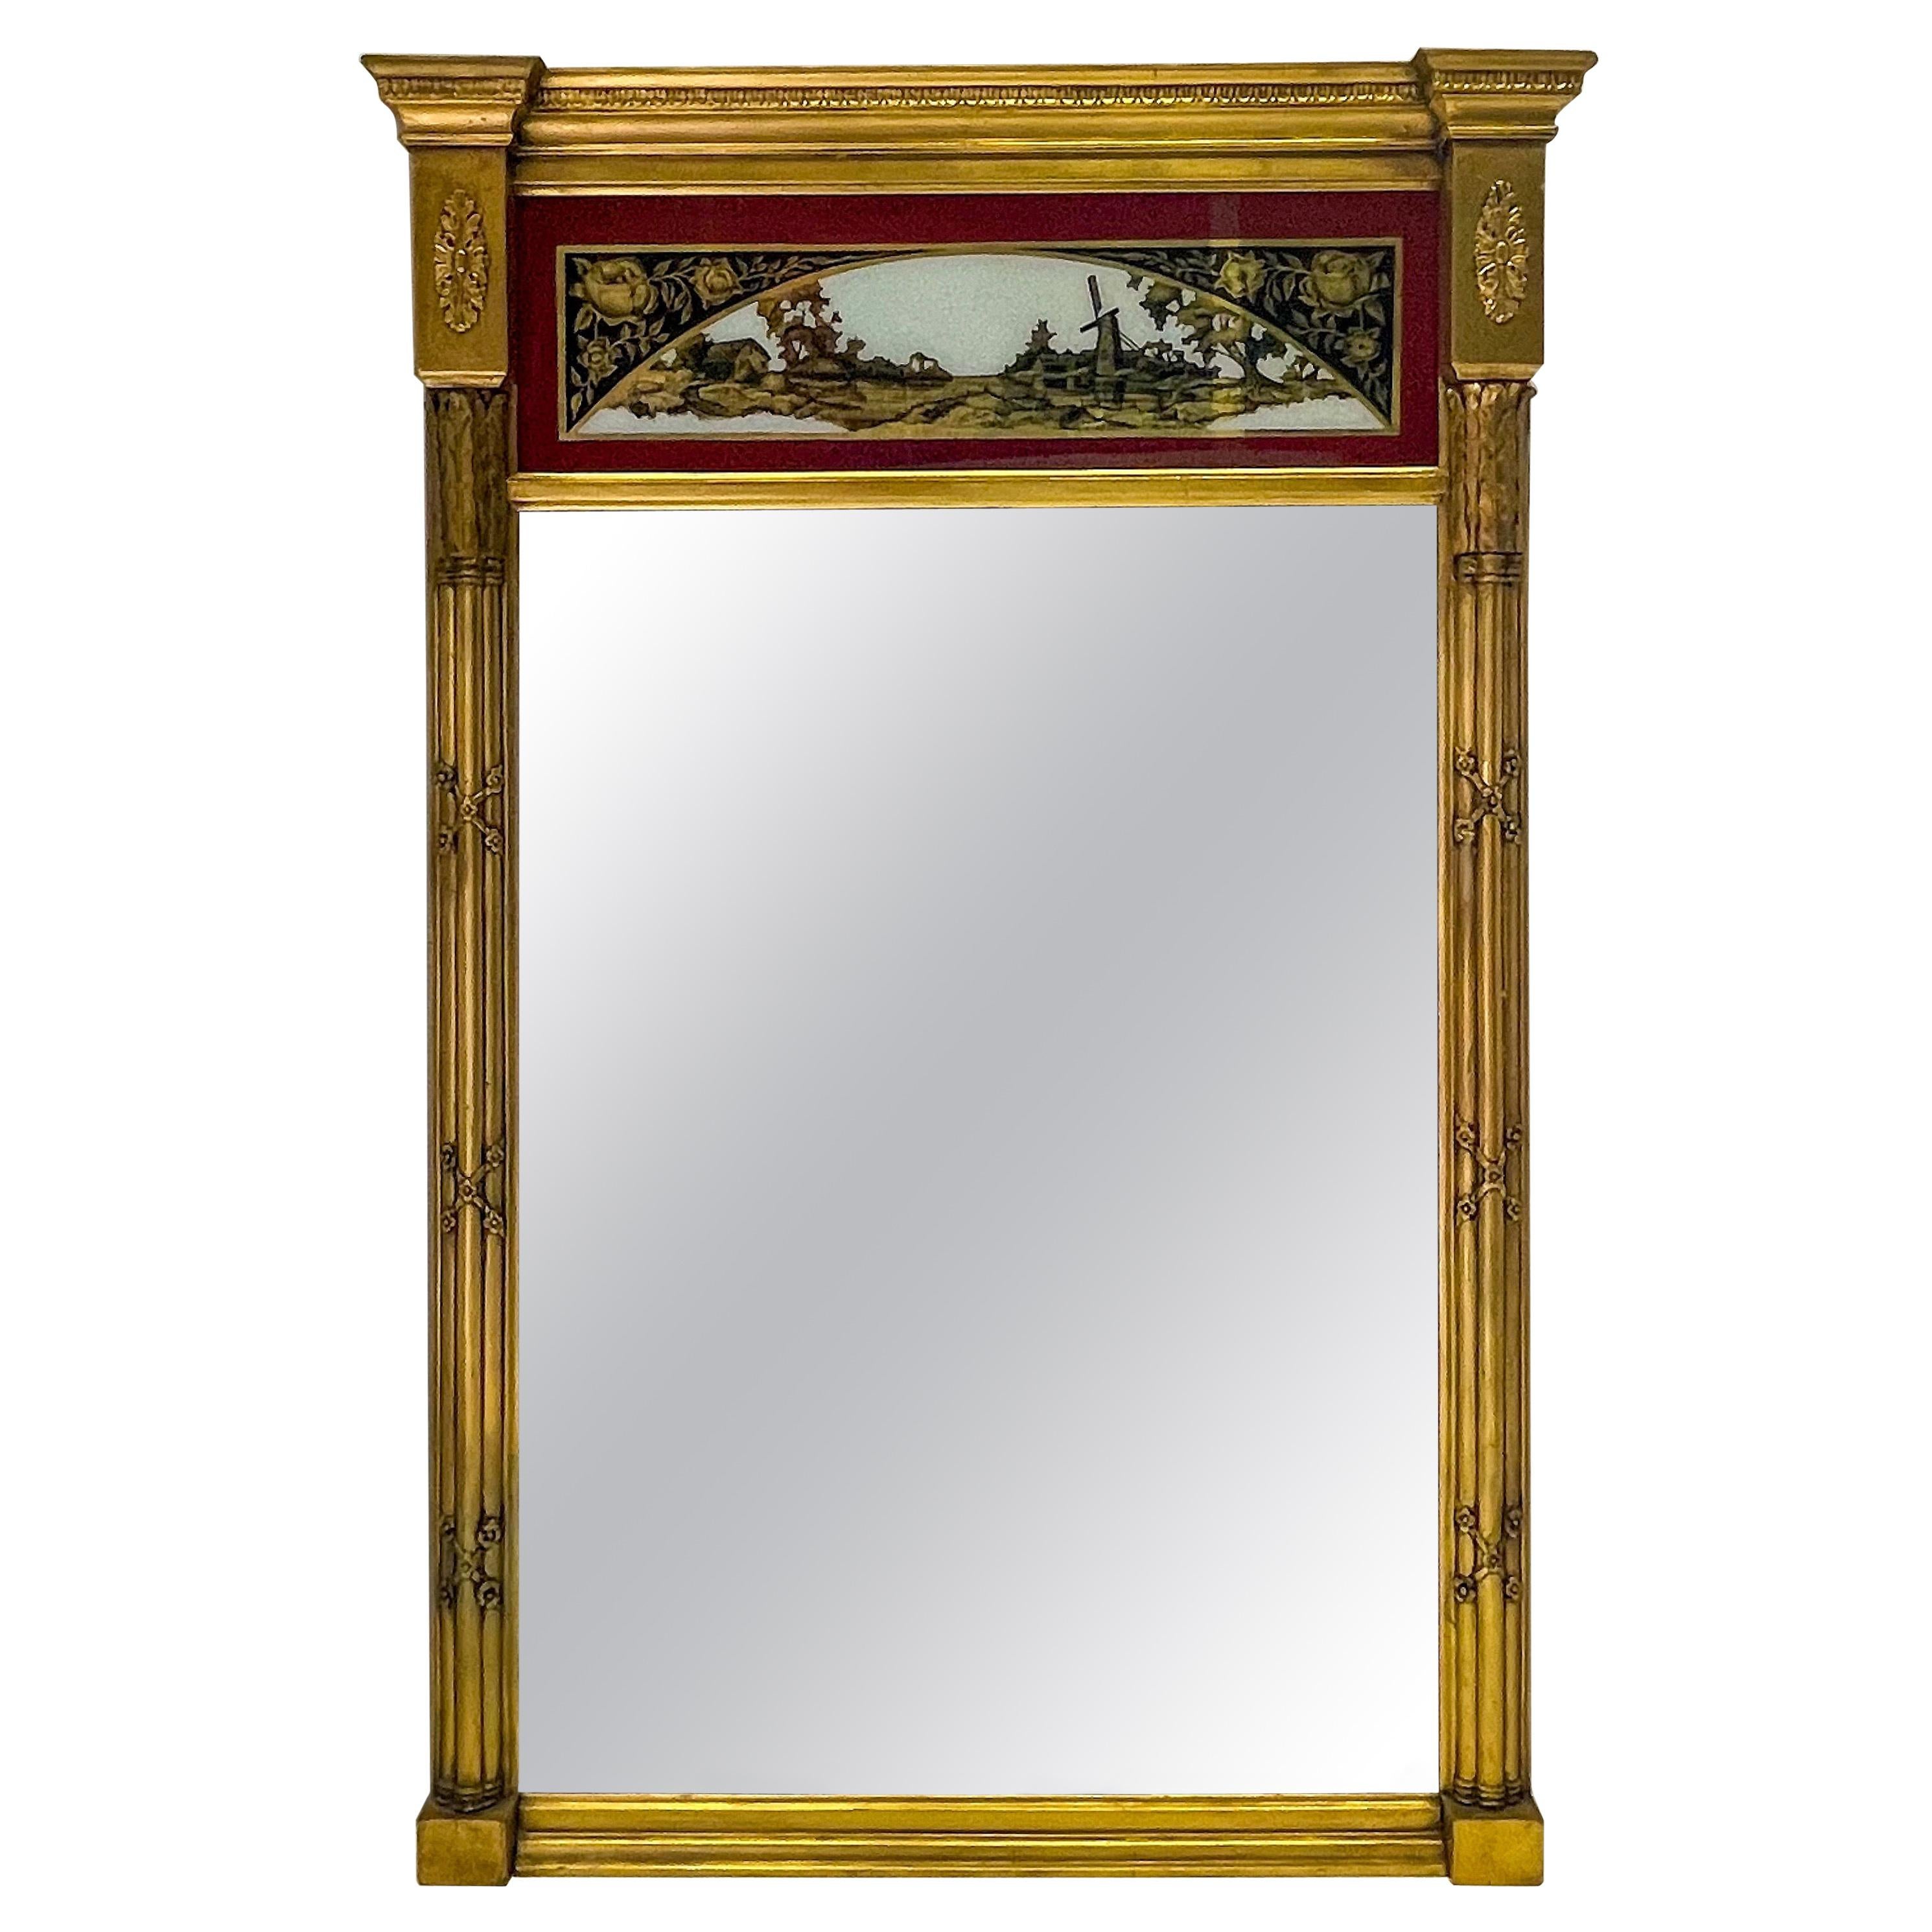 19th C. French Neoclassical Water Gilt Eglomise Trumeau Mirror